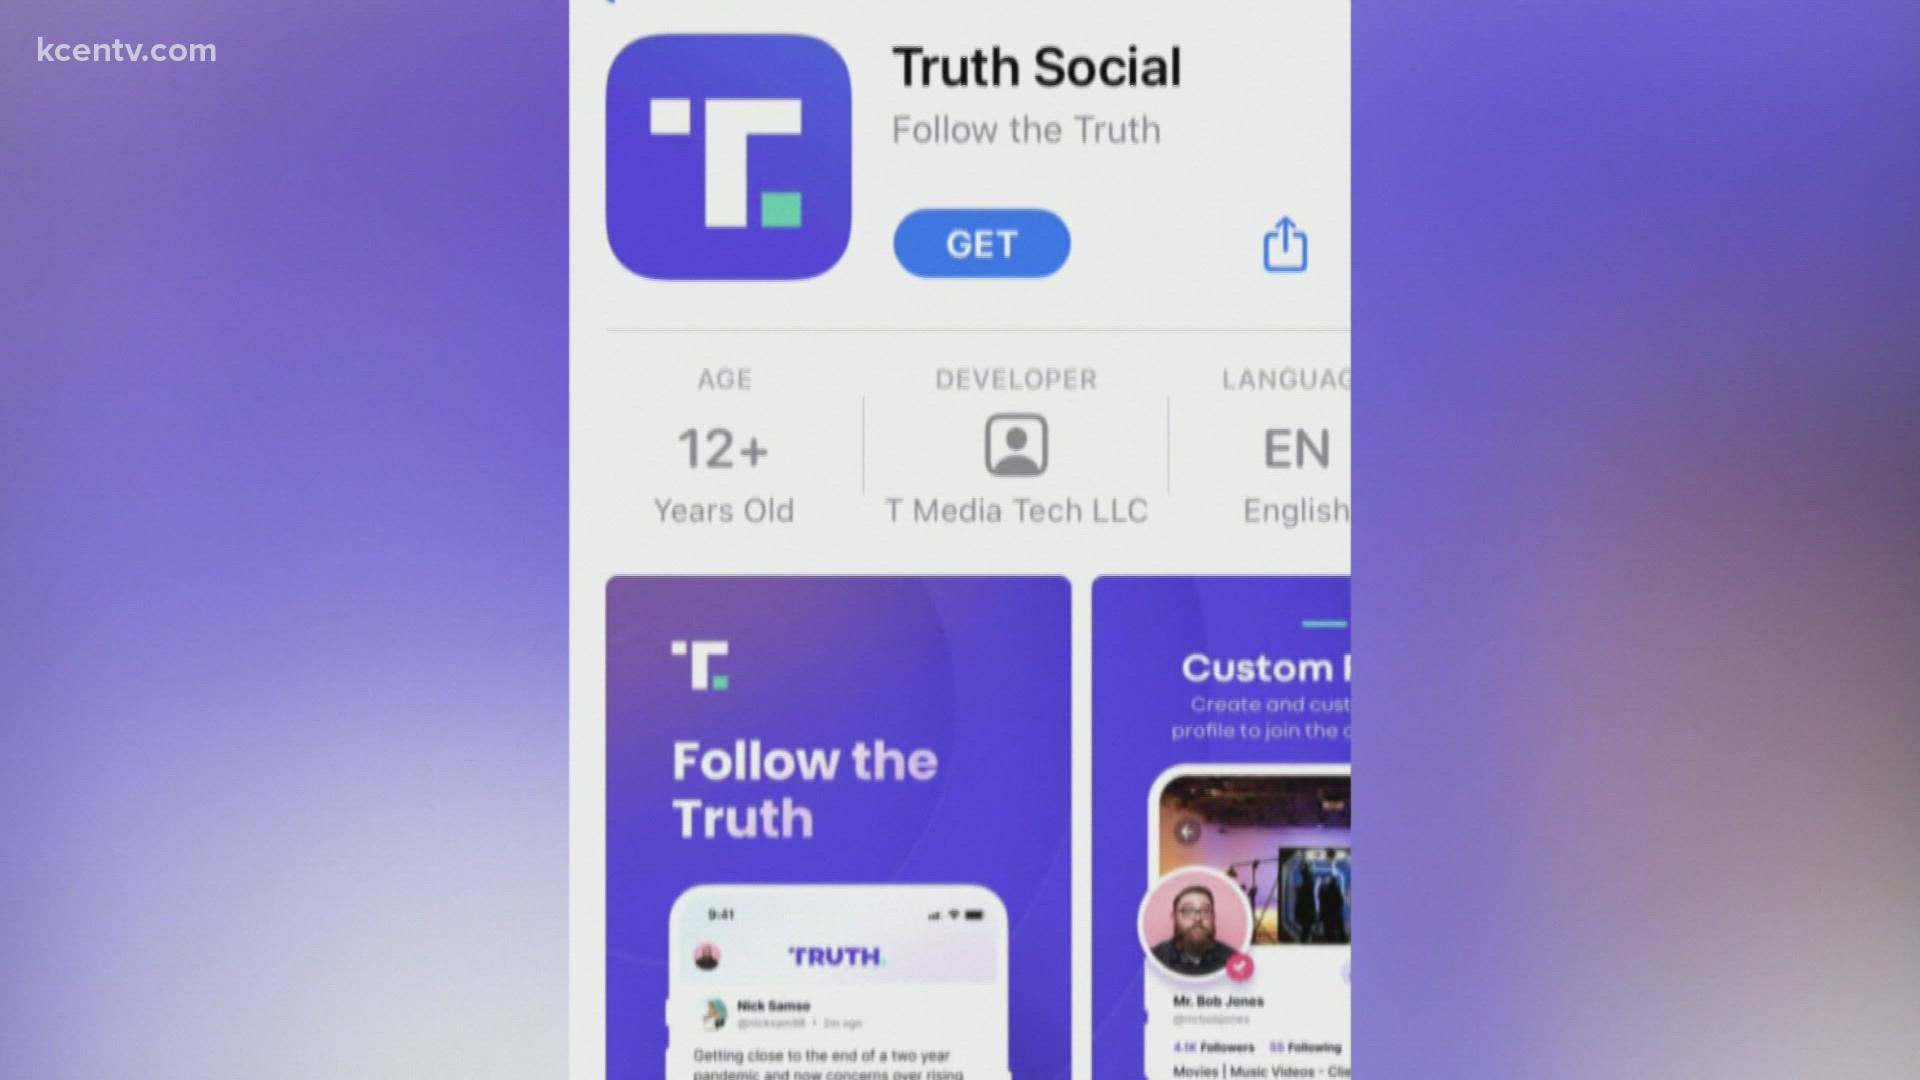 The Truth Social App is currently only available through the iPhone Apple store.